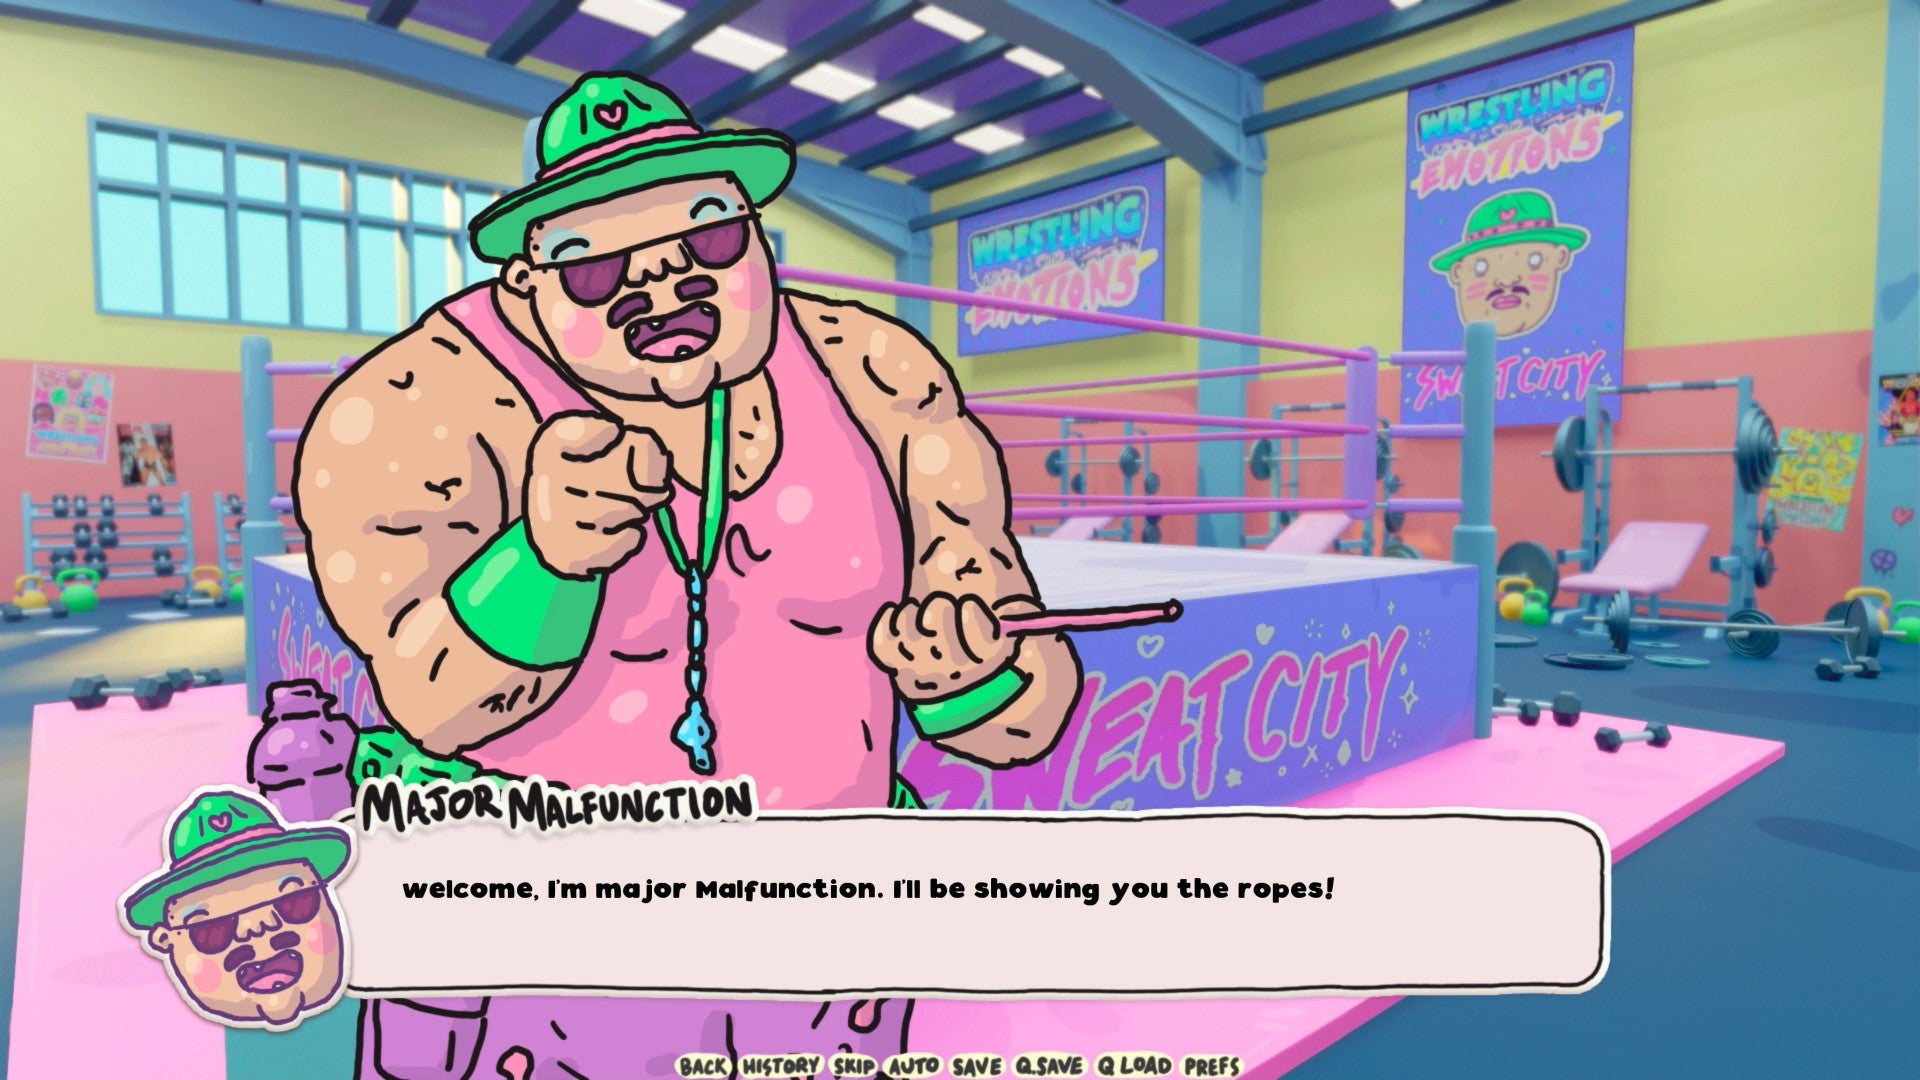 Major Malfunction, a smiley wrestling teacher wearing a pink vest, green hat, and shades, points at you and says "welcome, I'm Major Malfunction. I'll be showing you the ropes!", in Wrestling With Emotions: New Kid On The Block.